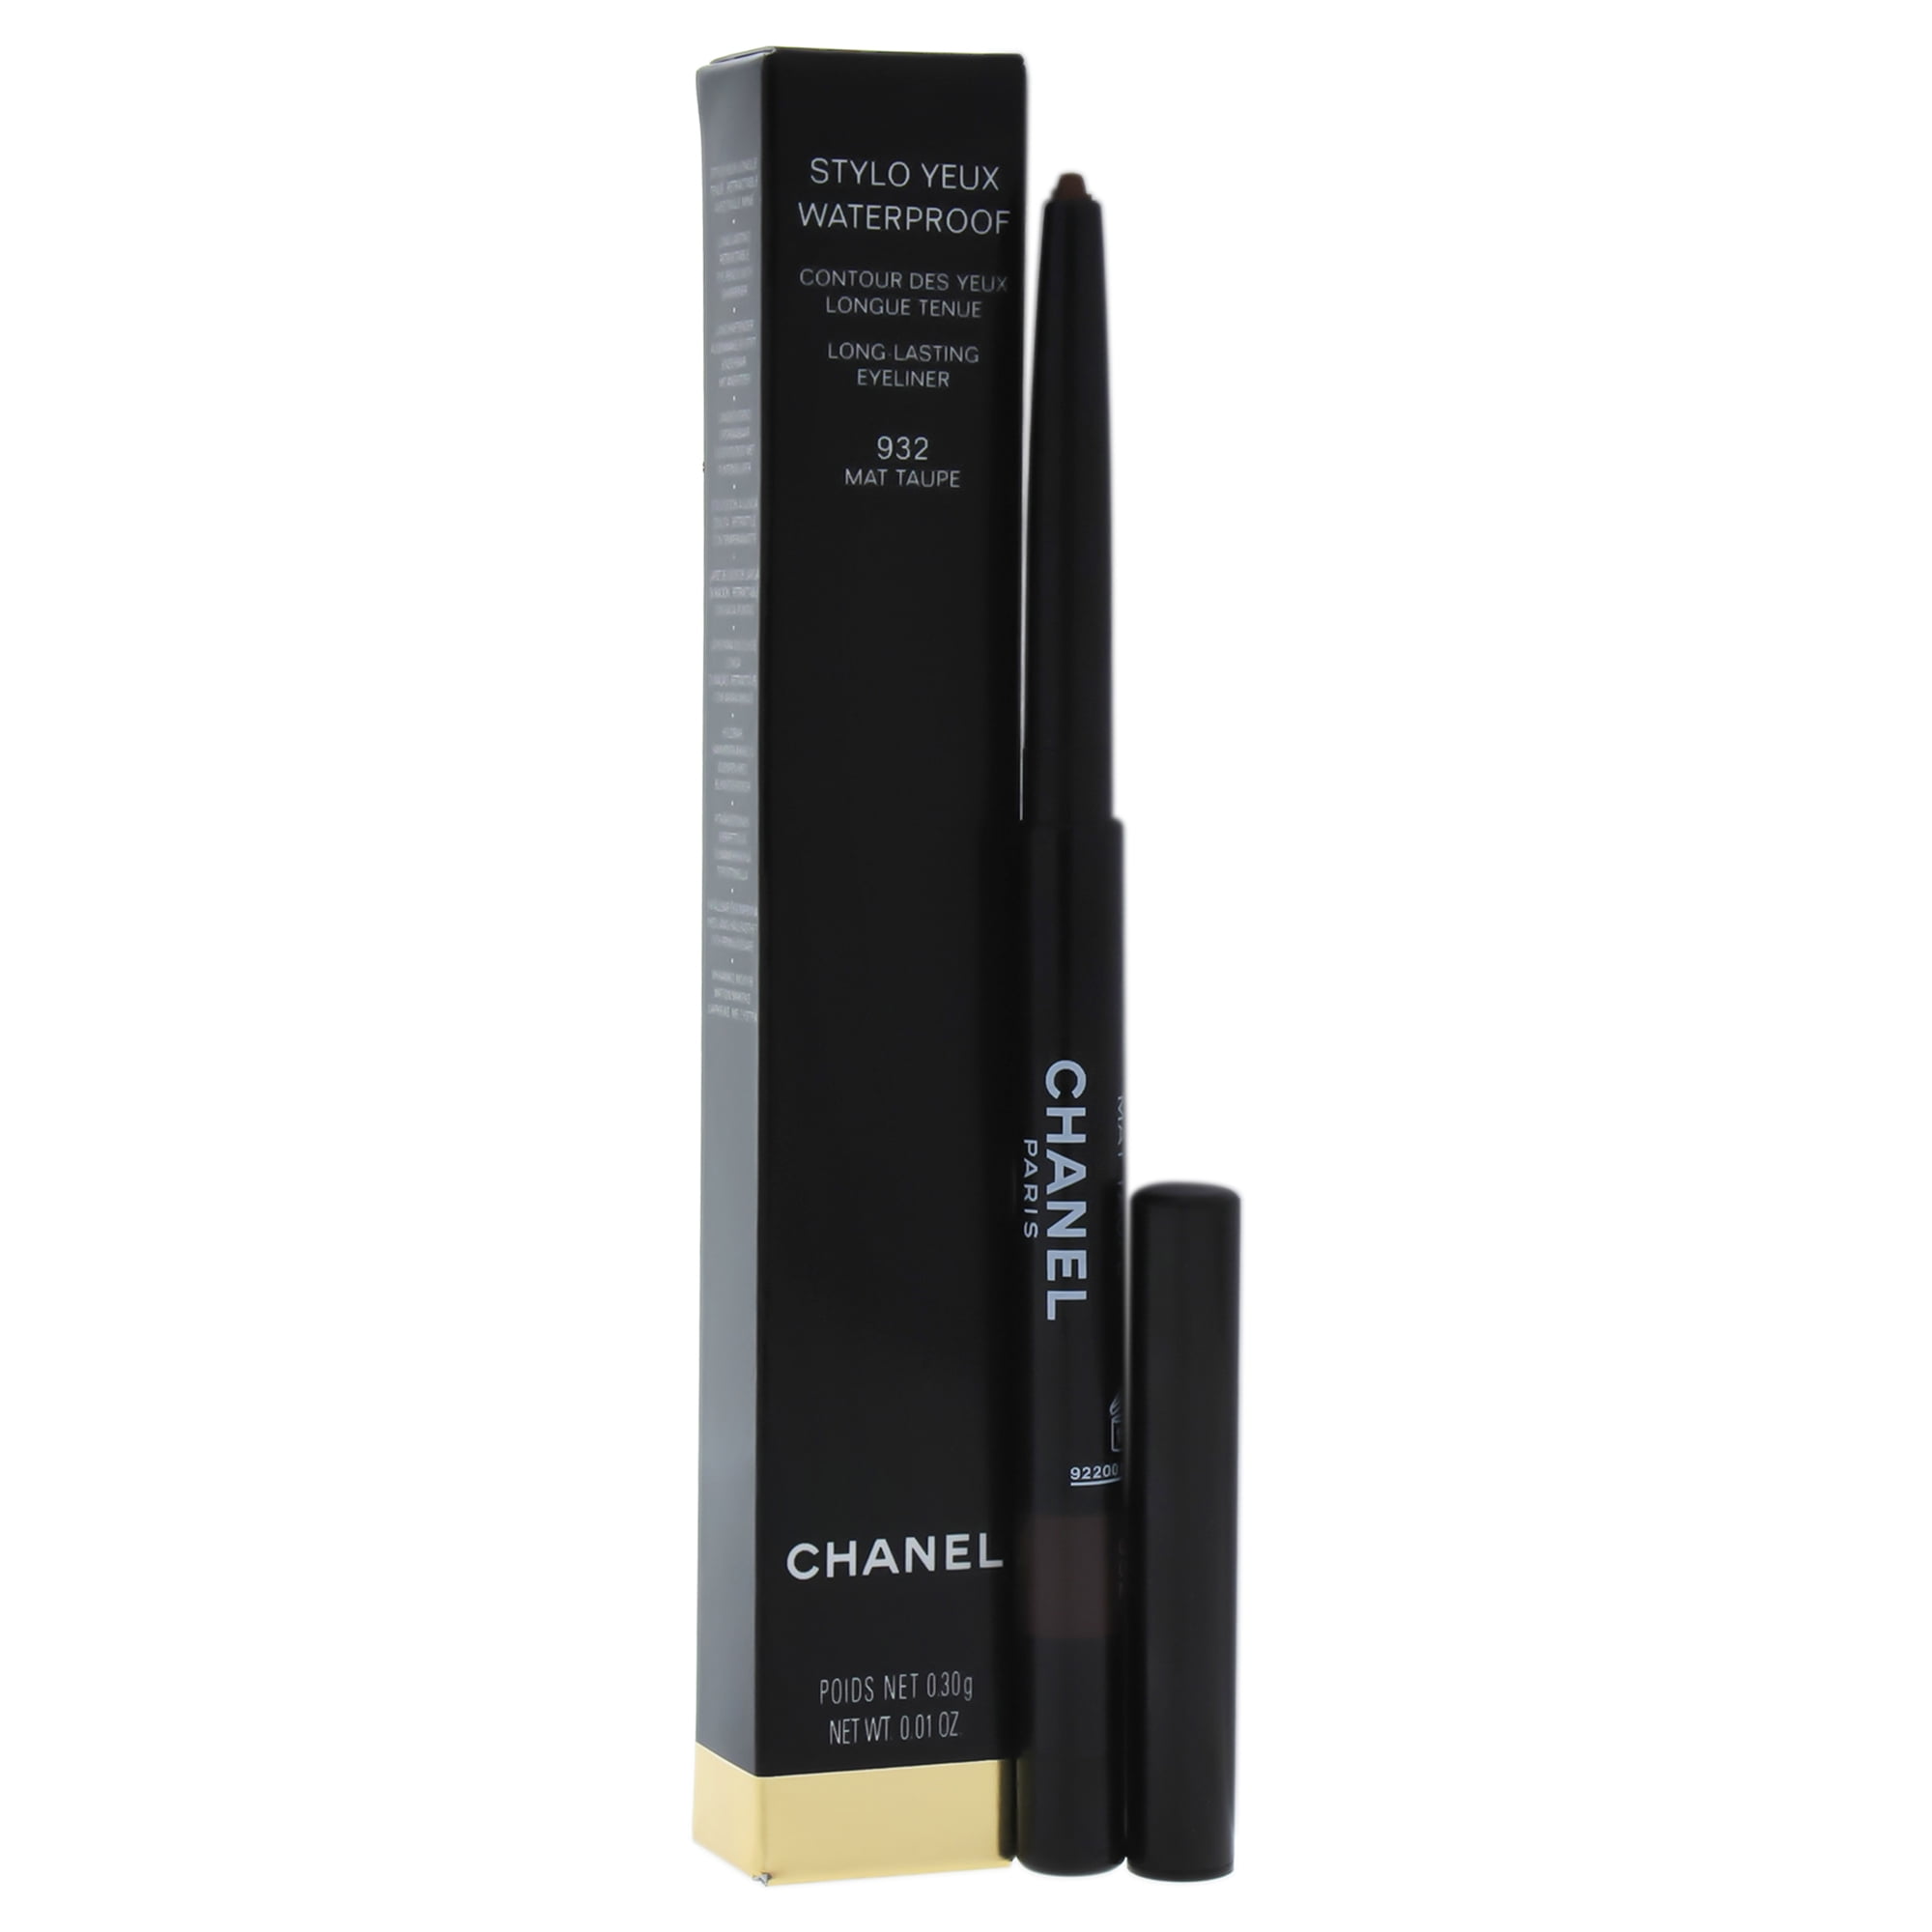 Stylo Yeux Waterproof Long-Lasting Eyeliner - 932 Mat Taupe by Chanel for  Women - 0.01 oz Eyeliner